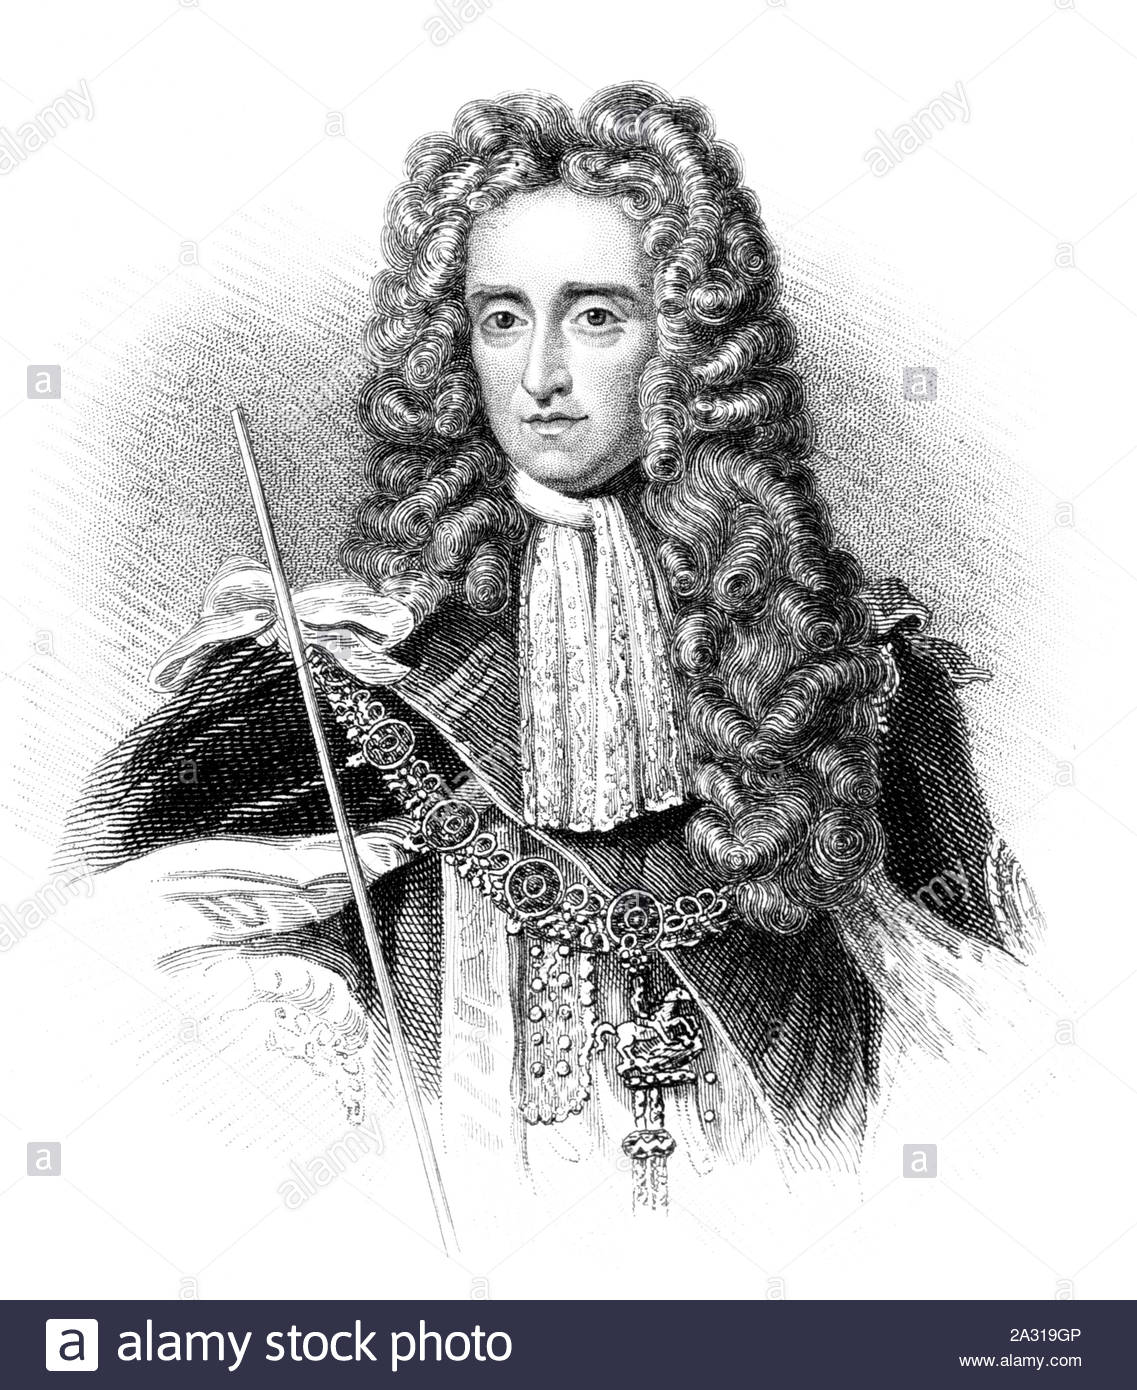 Thomas Osborne portrait, 1st Duke of Leeds, 1632 – 1712, was an English politician who was part of the Immortal Seven group that invited William III, Prince of Orange to depose James II of England as monarch during the Glorious Revolution, vintage illustration from 1850 Stock Photo